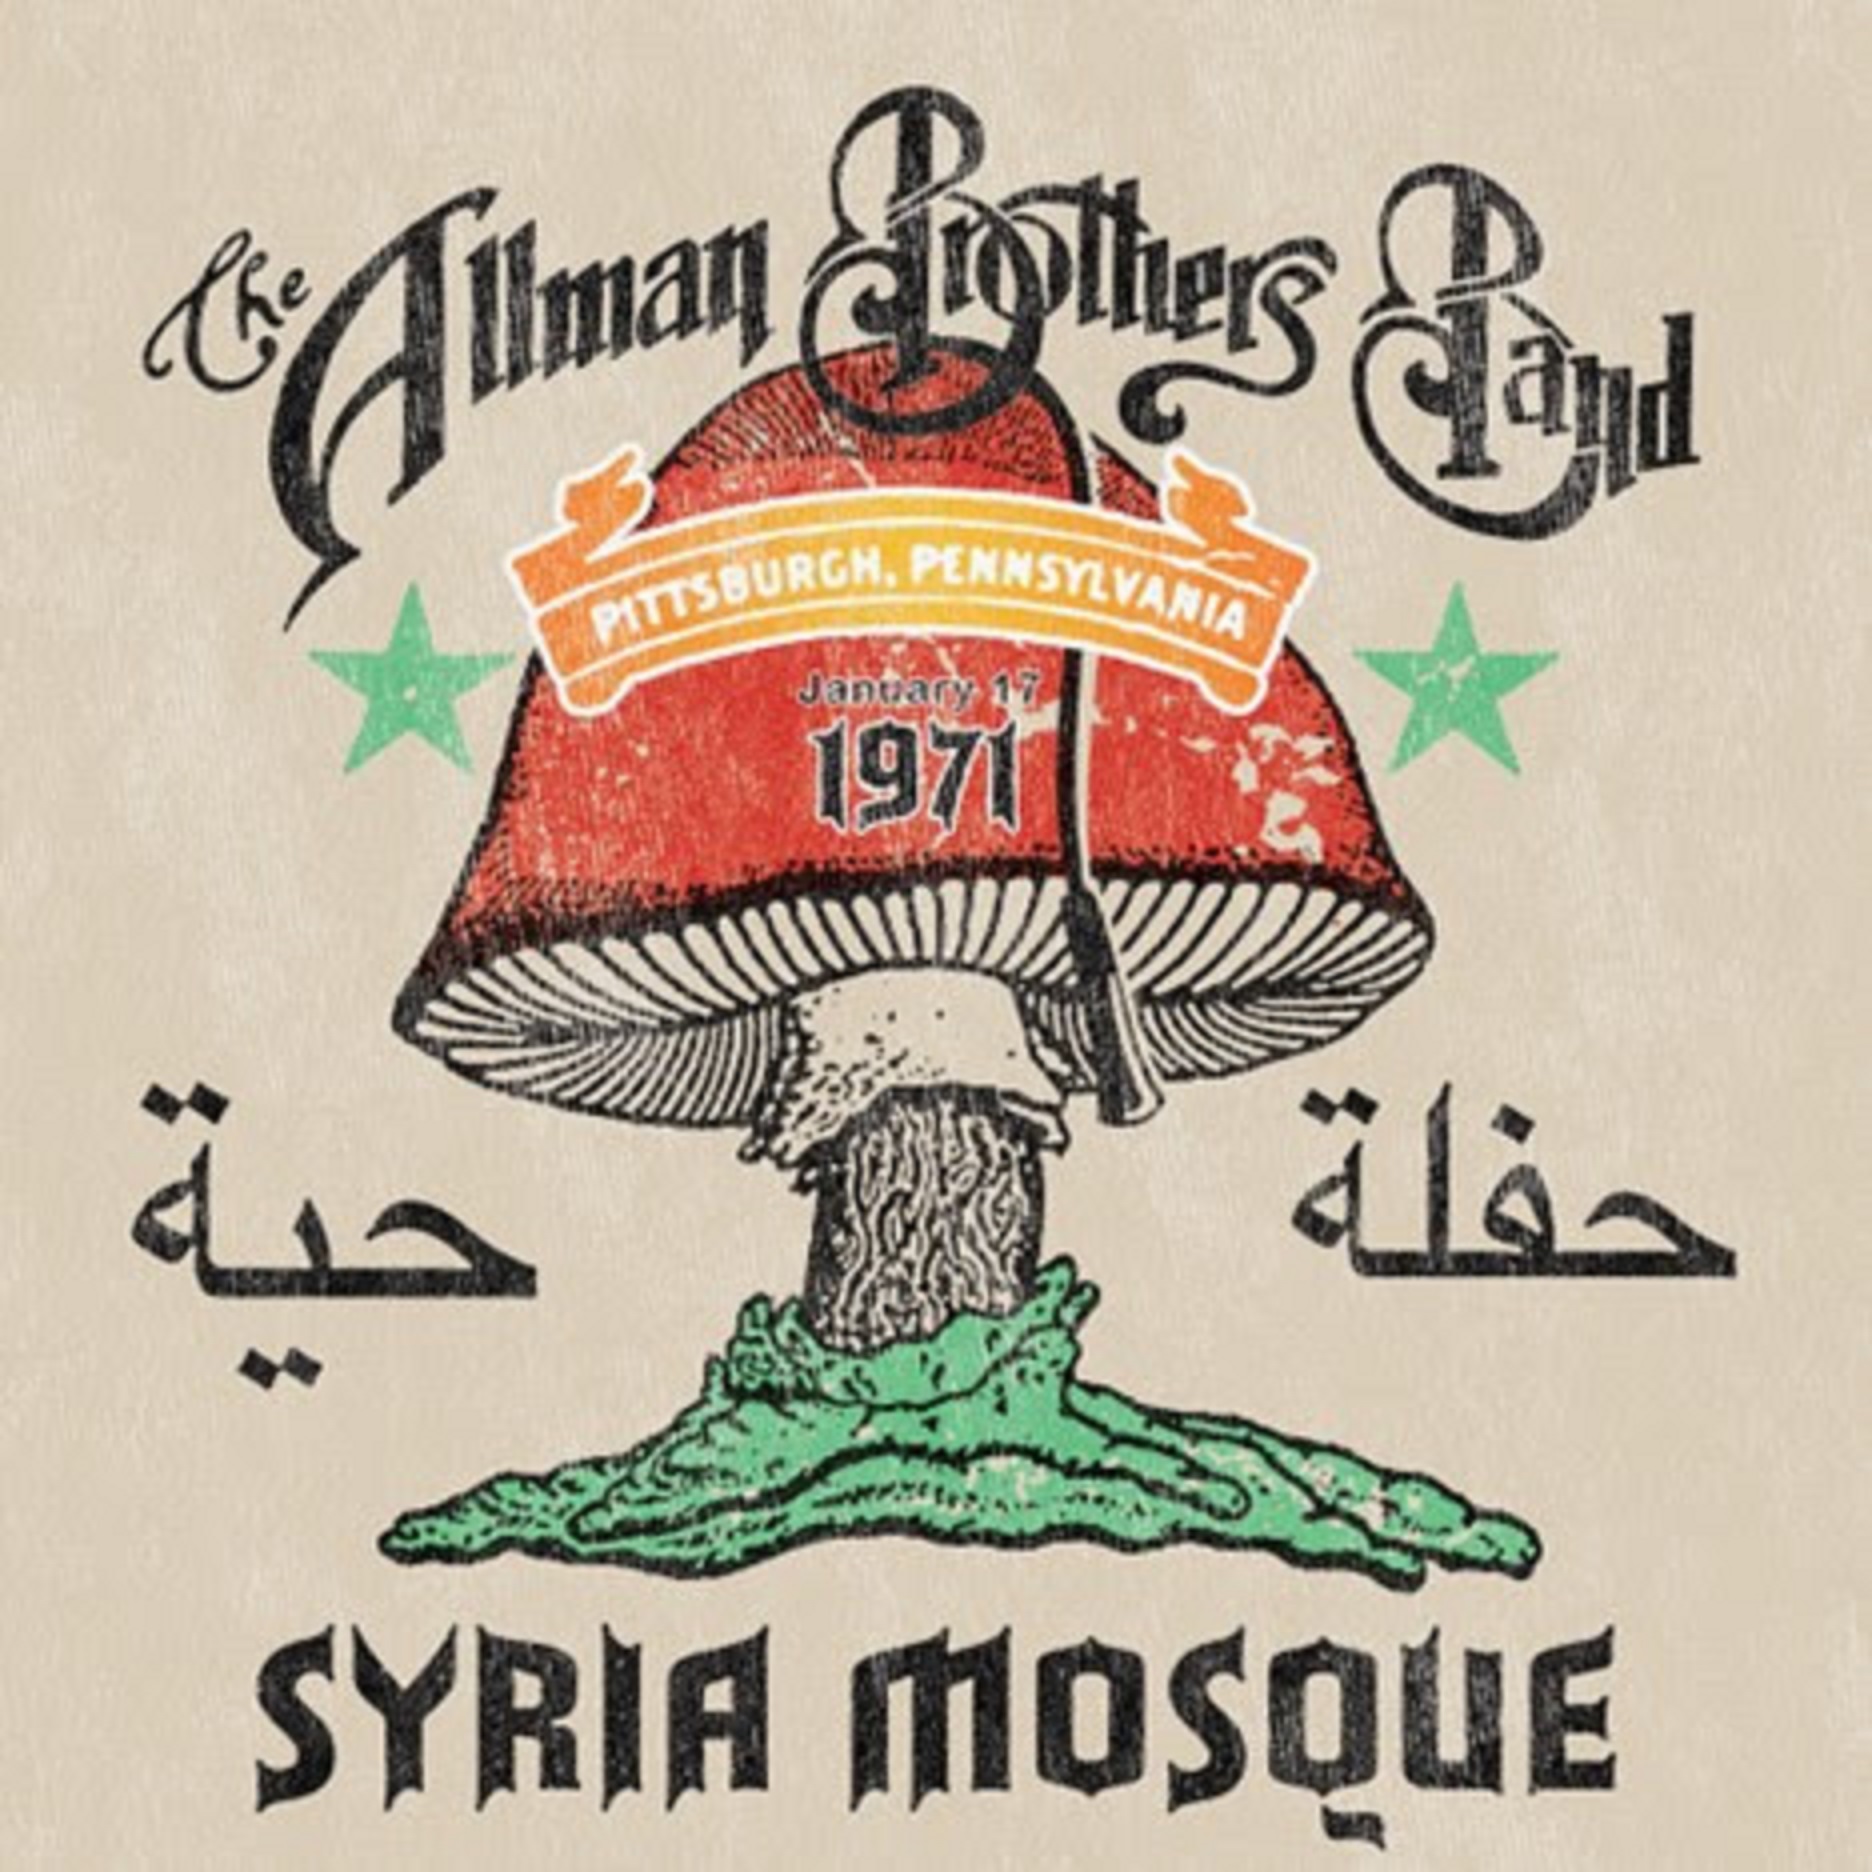 Allman Brothers Band To Release 'Syria Mosque: Pittsburgh, PA January 17, 1971'